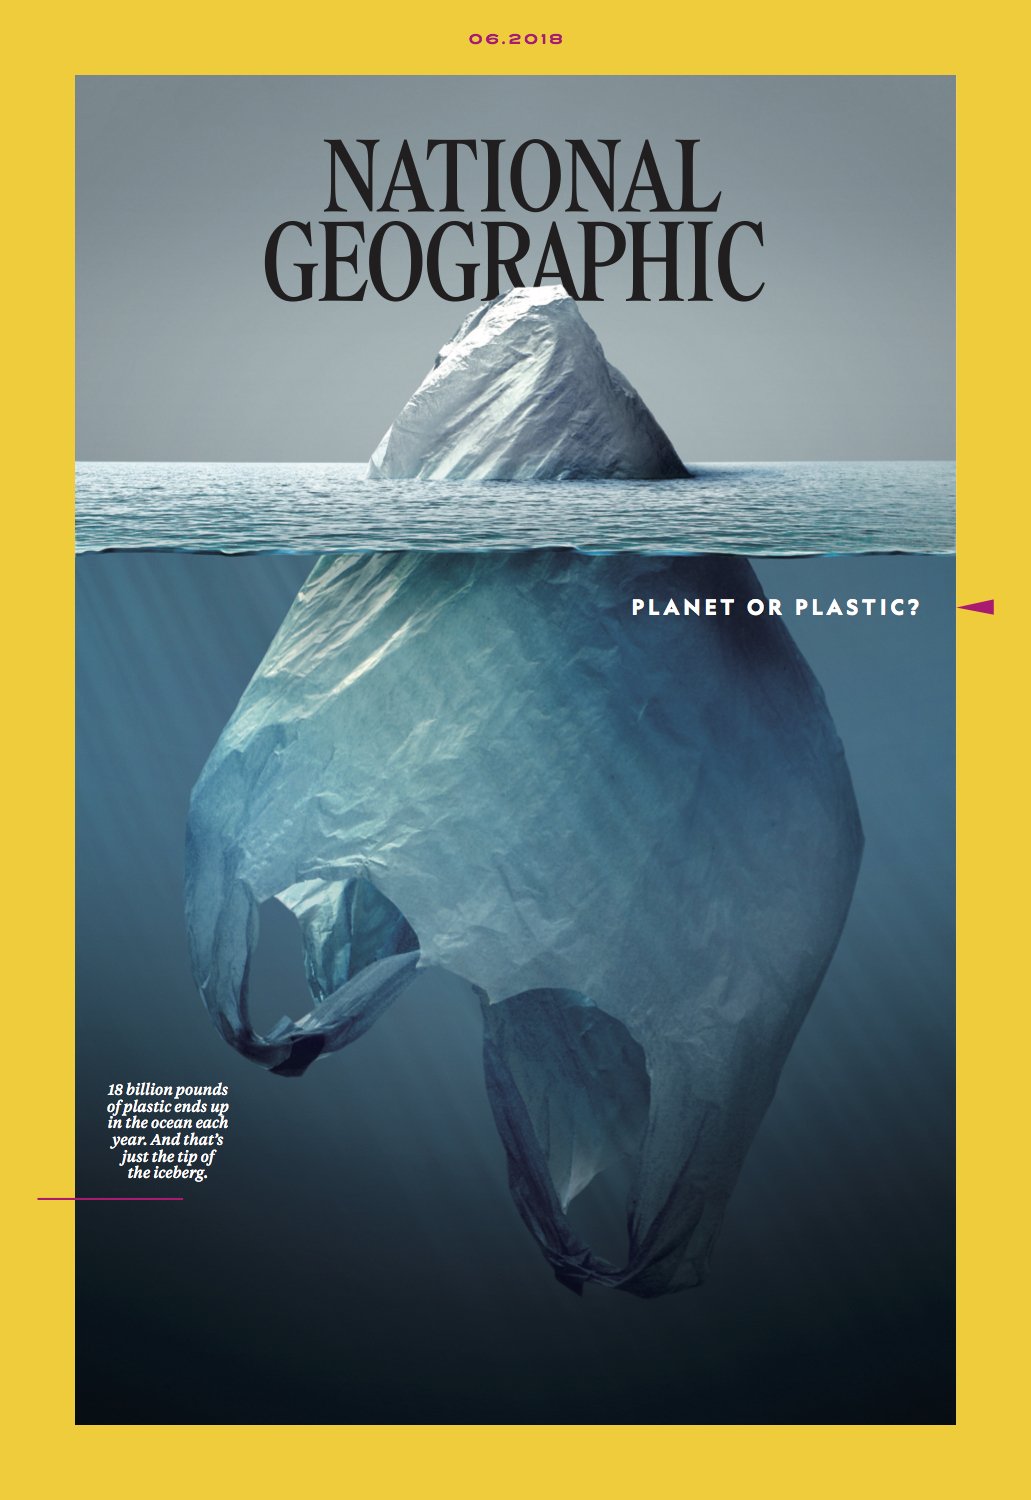 National Geographic Viral June 2018 Cover ‘Planet or Plastic’